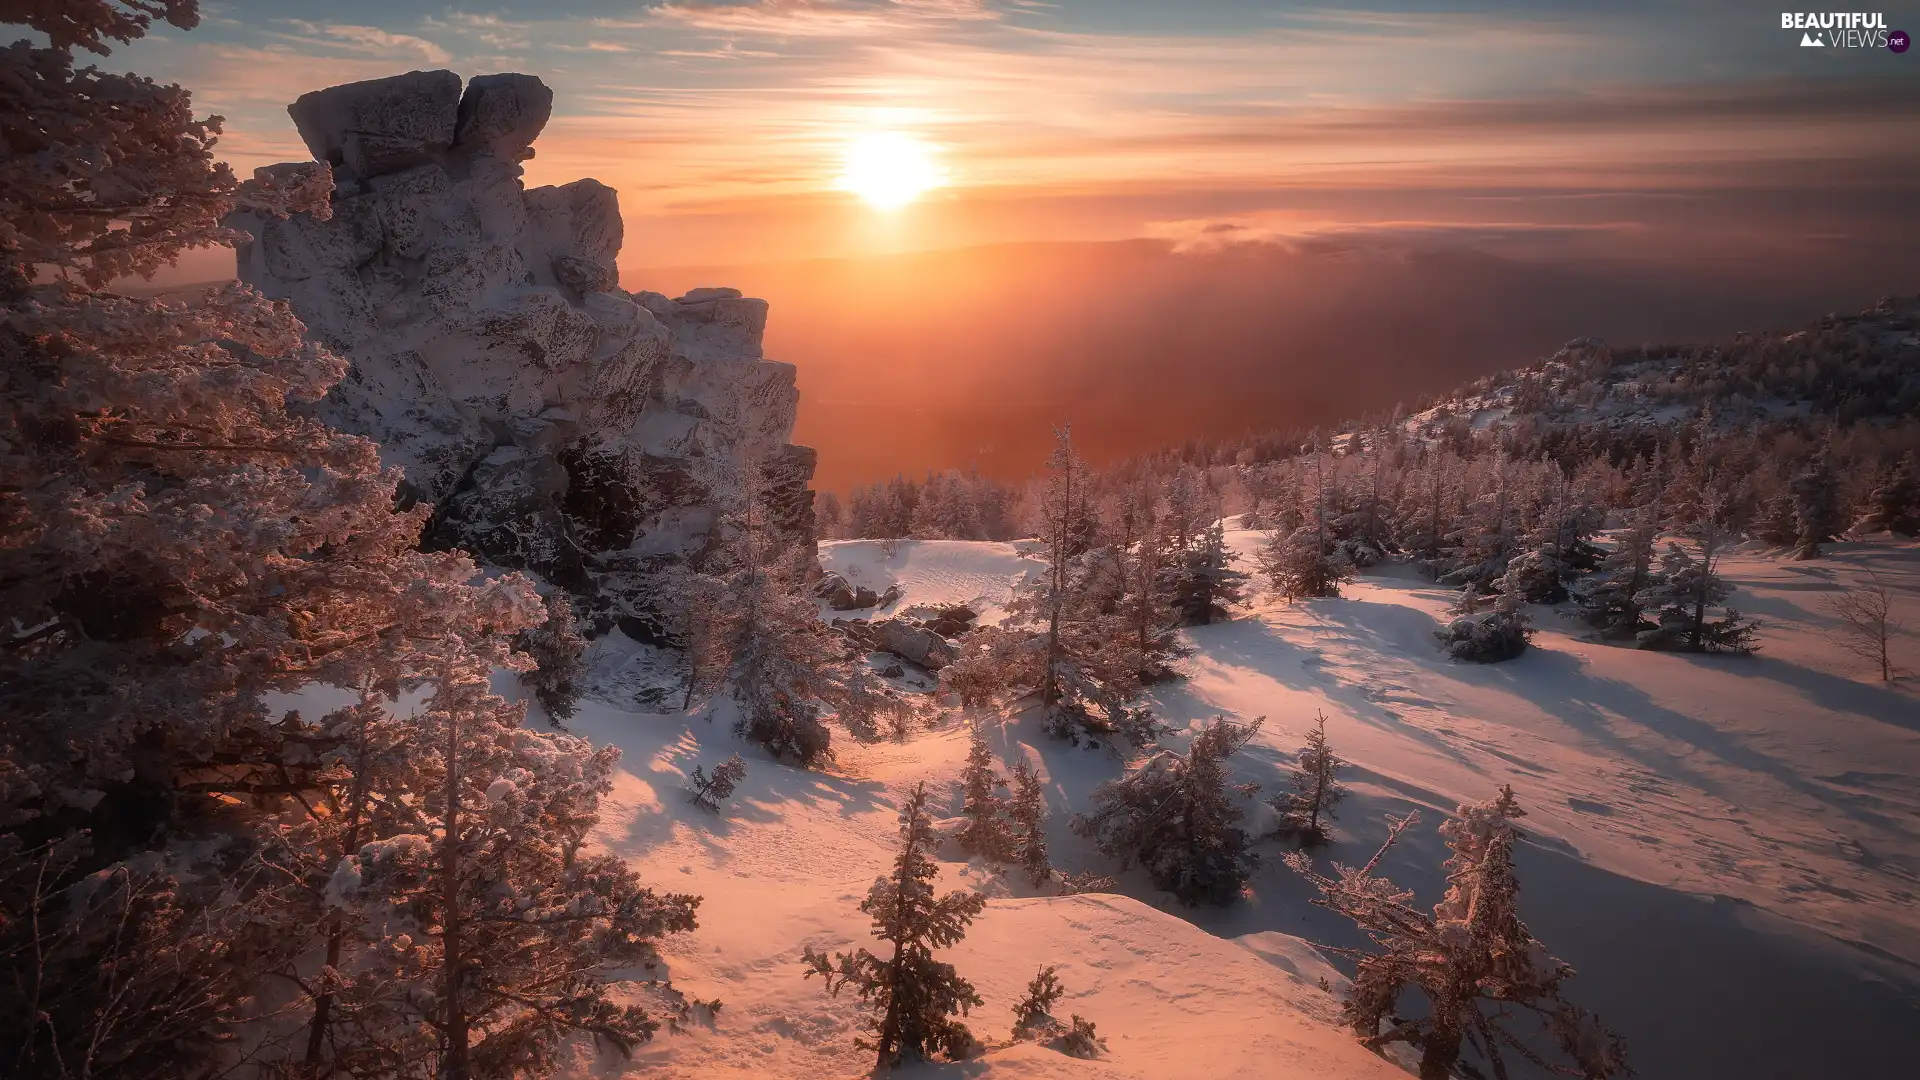 rocks, Snowy, Great Sunsets, trees, Bush, Mountains, winter, viewes